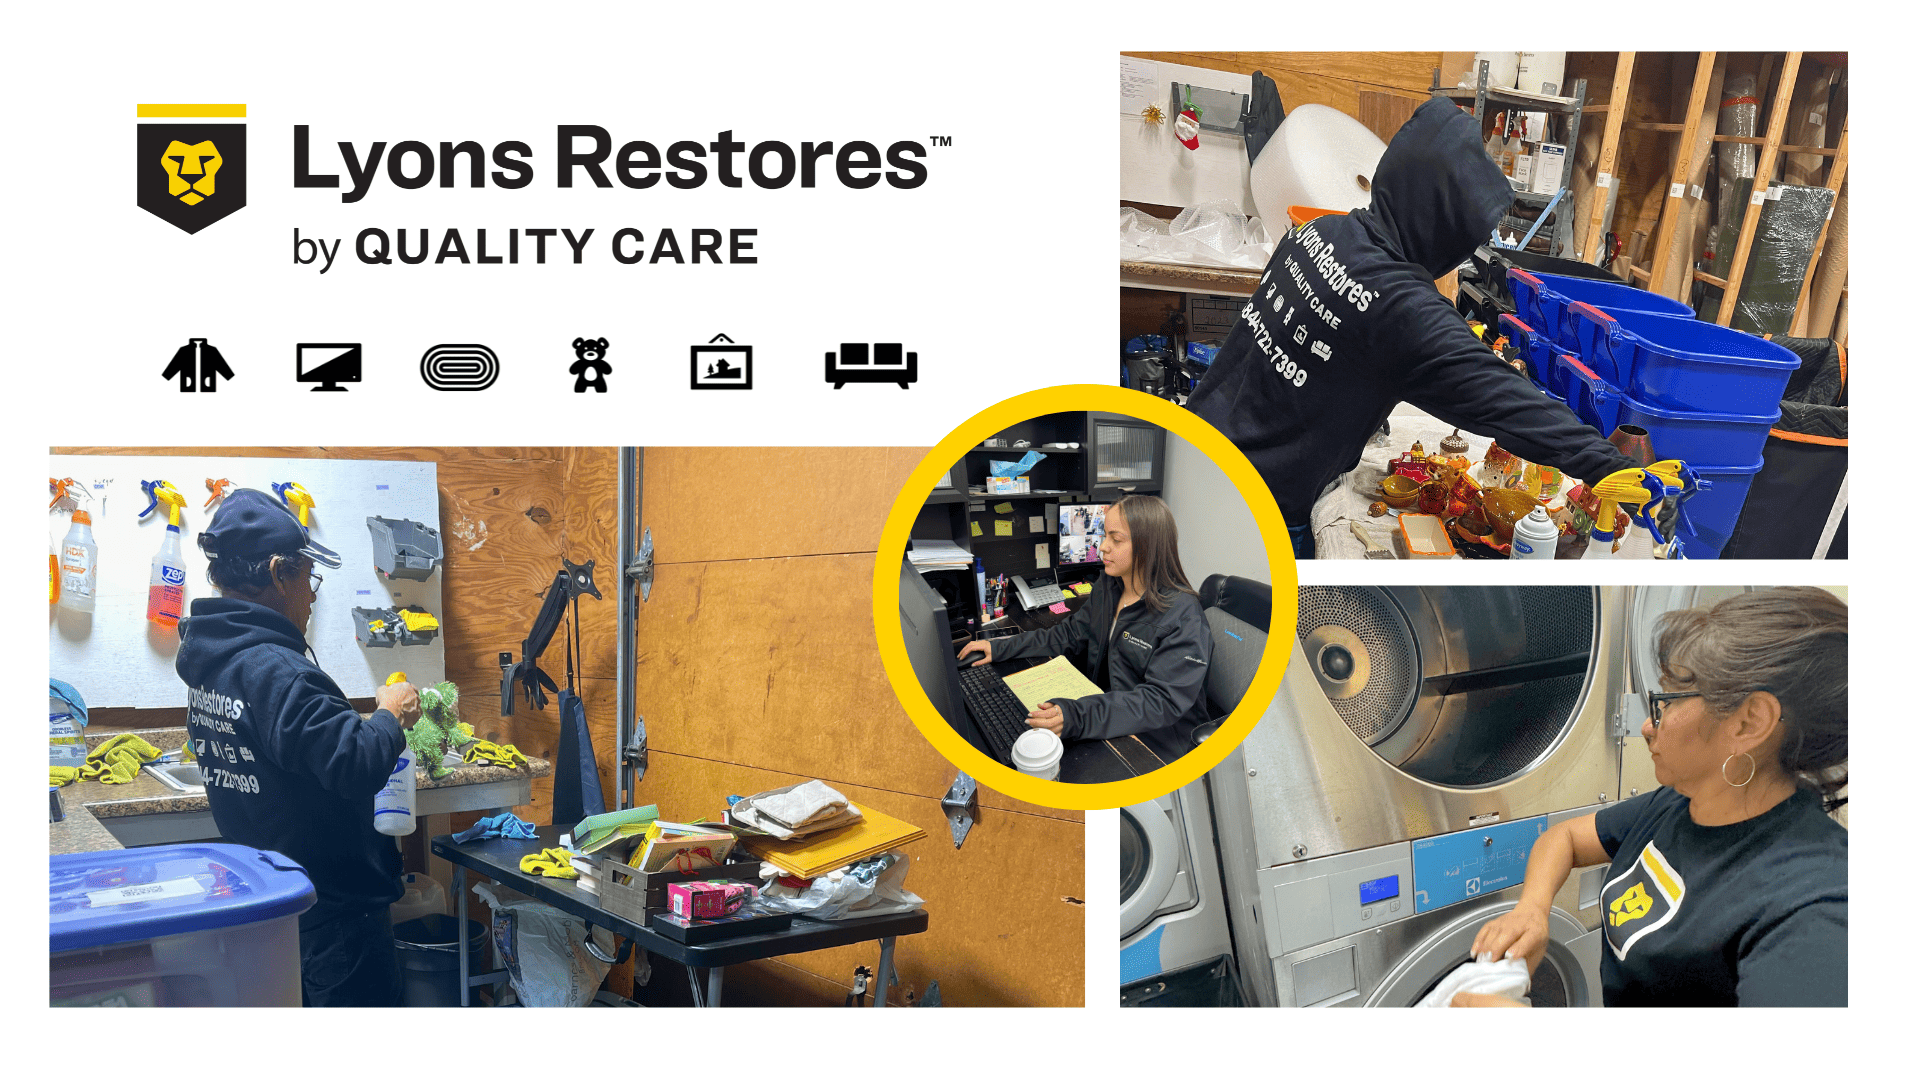 Lyons Restores by Quality Care